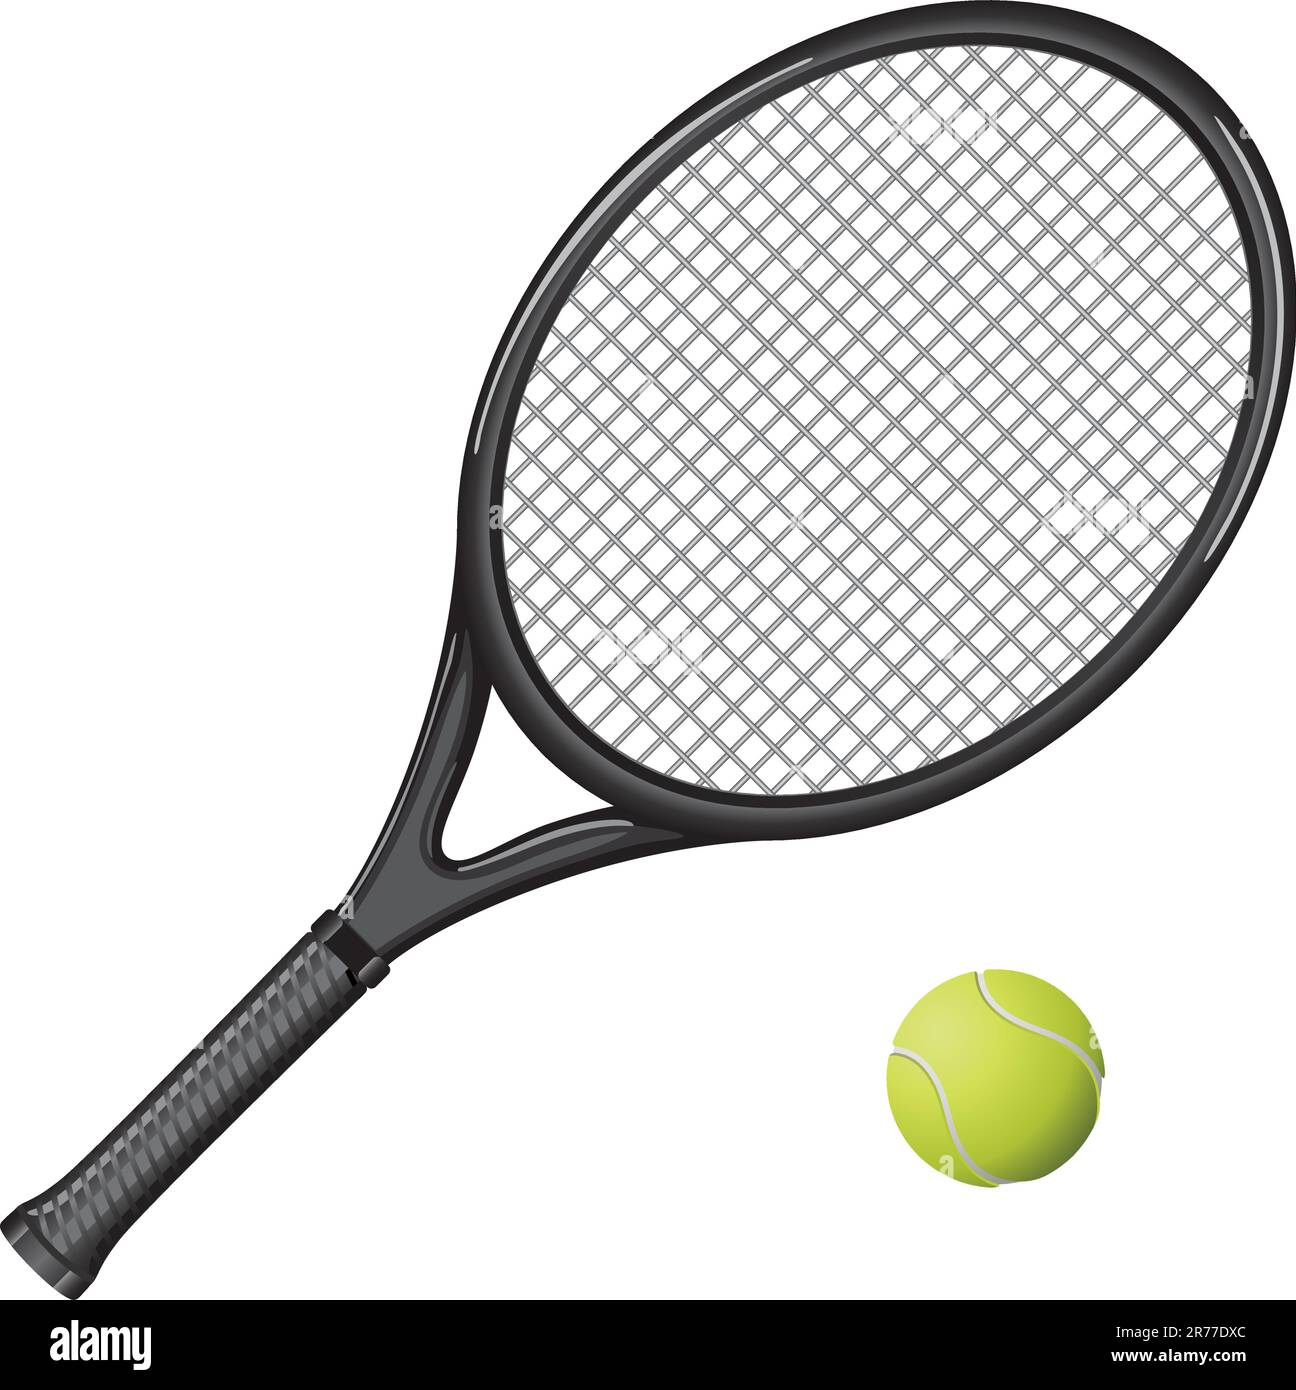 Isolated image of a tennis racket and ball. Vector illustration. Stock Vector